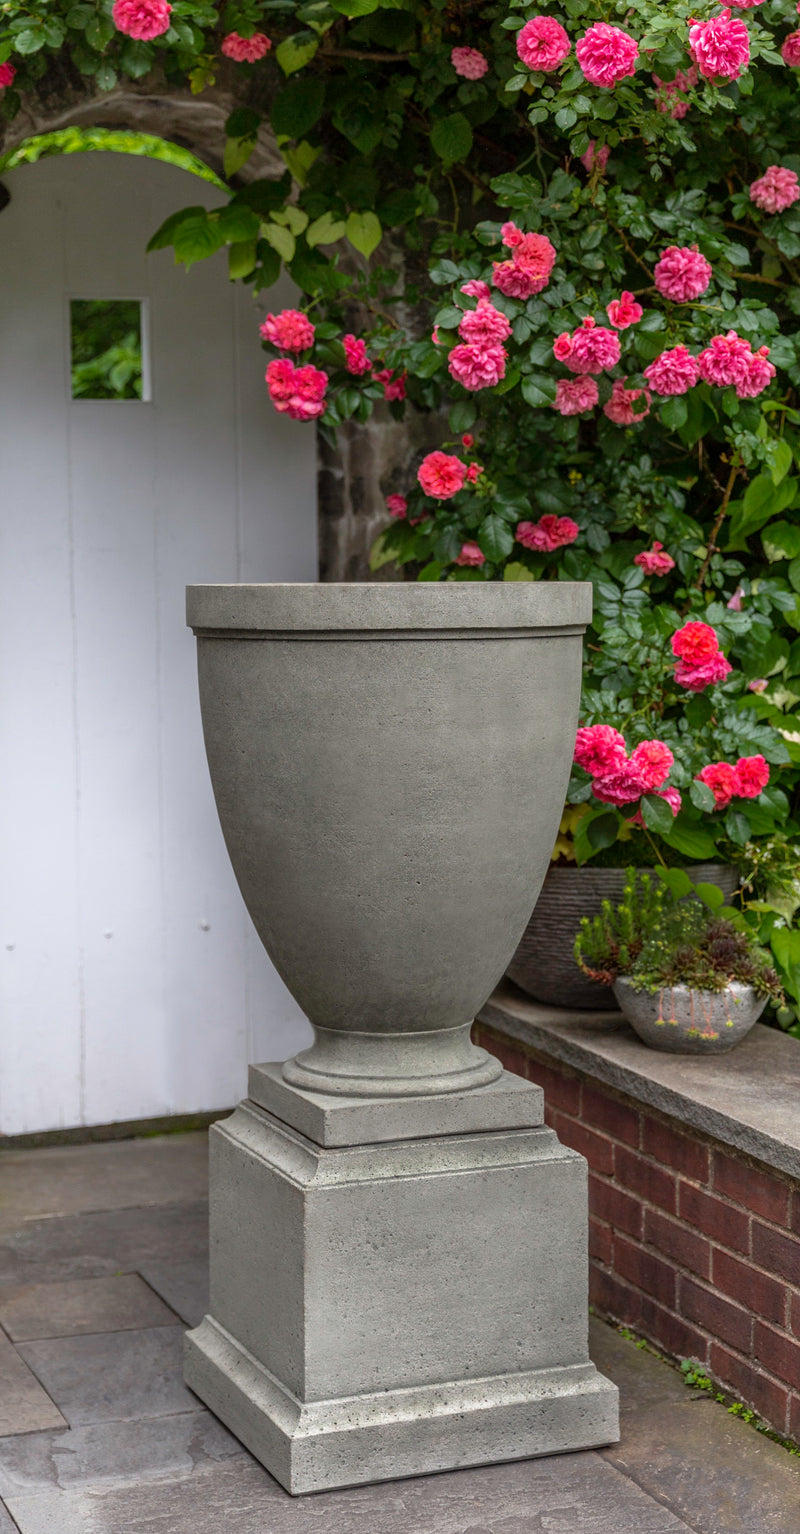 Narrow grey urn pictured on a grey pedestal in front of blooming roses